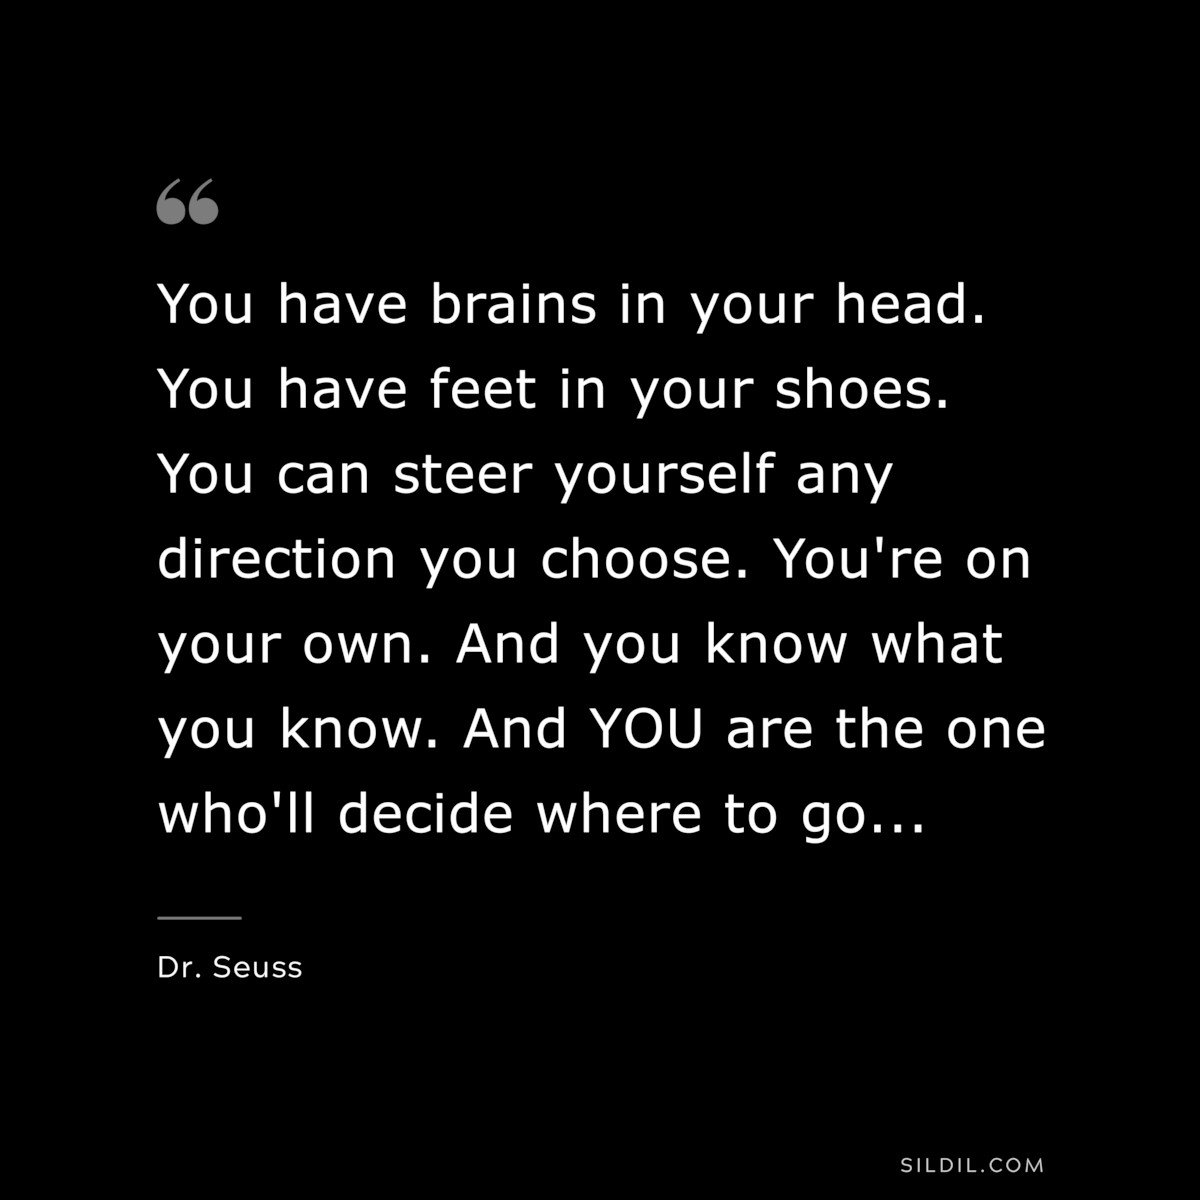 You have brains in your head. You have feet in your shoes. You can steer yourself any direction you choose. You're on your own. And you know what you know. And YOU are the one who'll decide where to go... ― Dr. Seuss